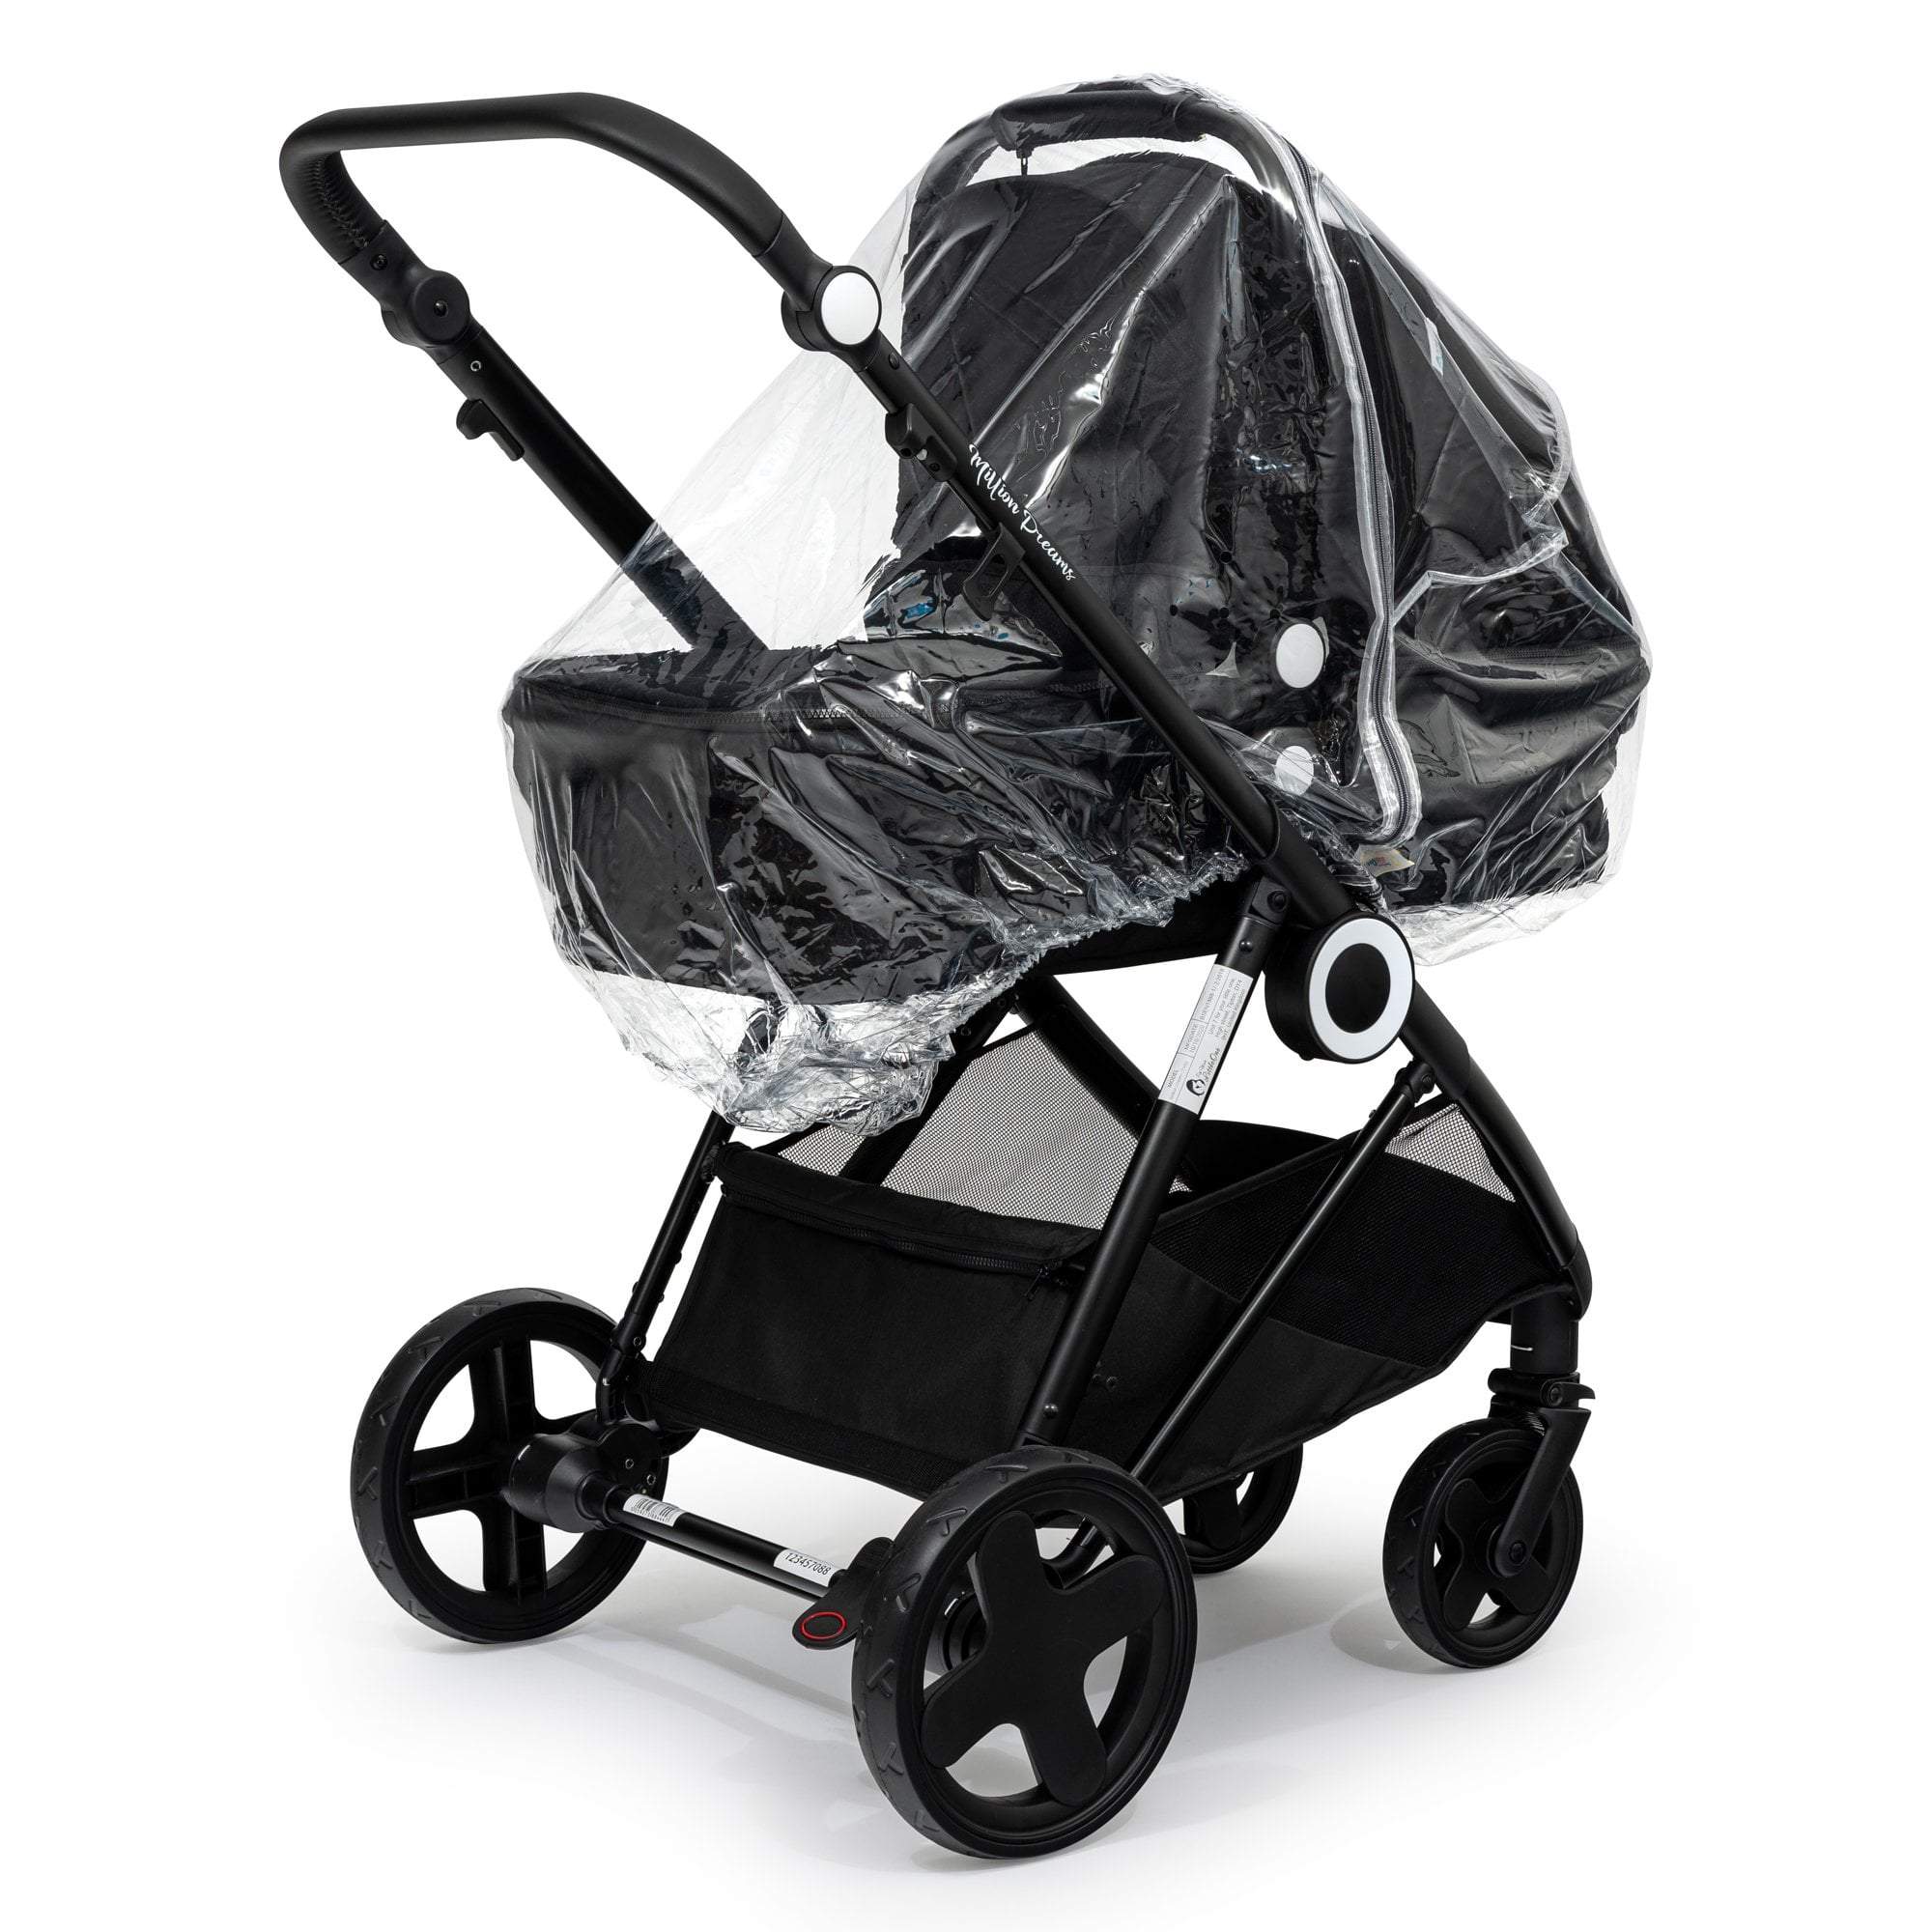 Carrycot Raincover Compatible With Bebecar - Fits All Models -  | For Your Little One